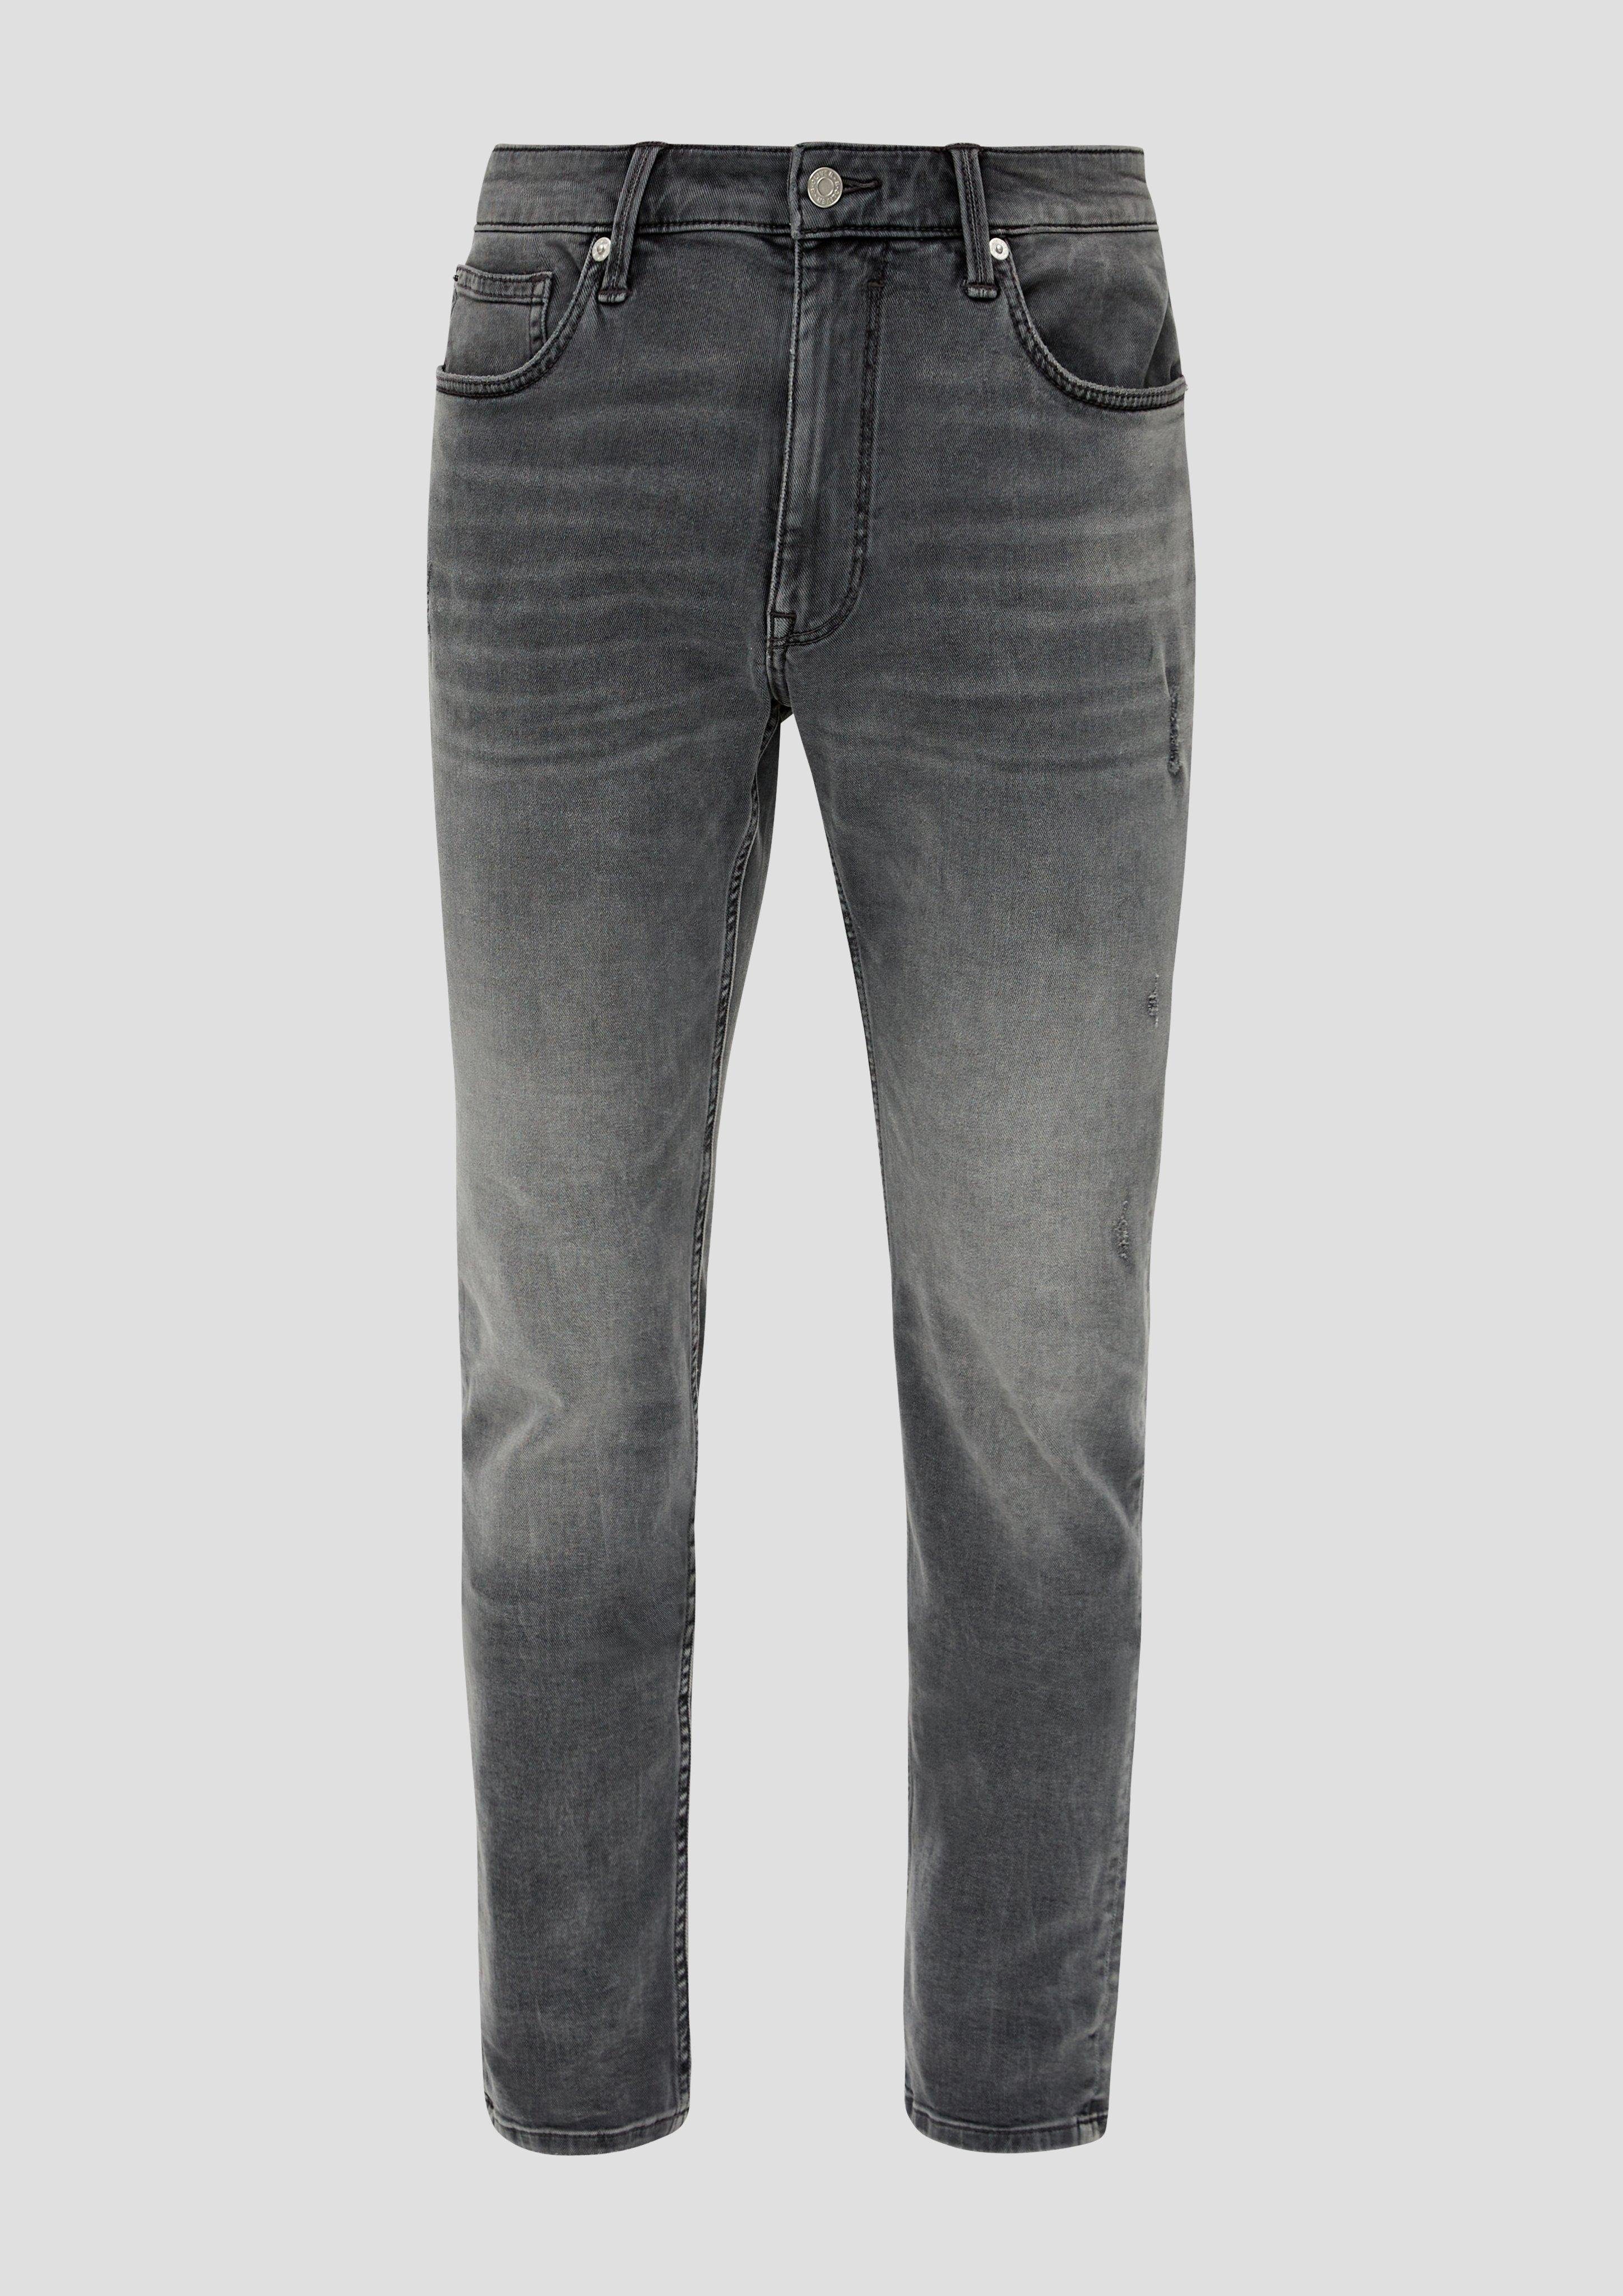 s.Oliver Stoffhose Jeans Keith / / Leg Waschung, Mid Fit Rise Slim / Leder-Patch Straight